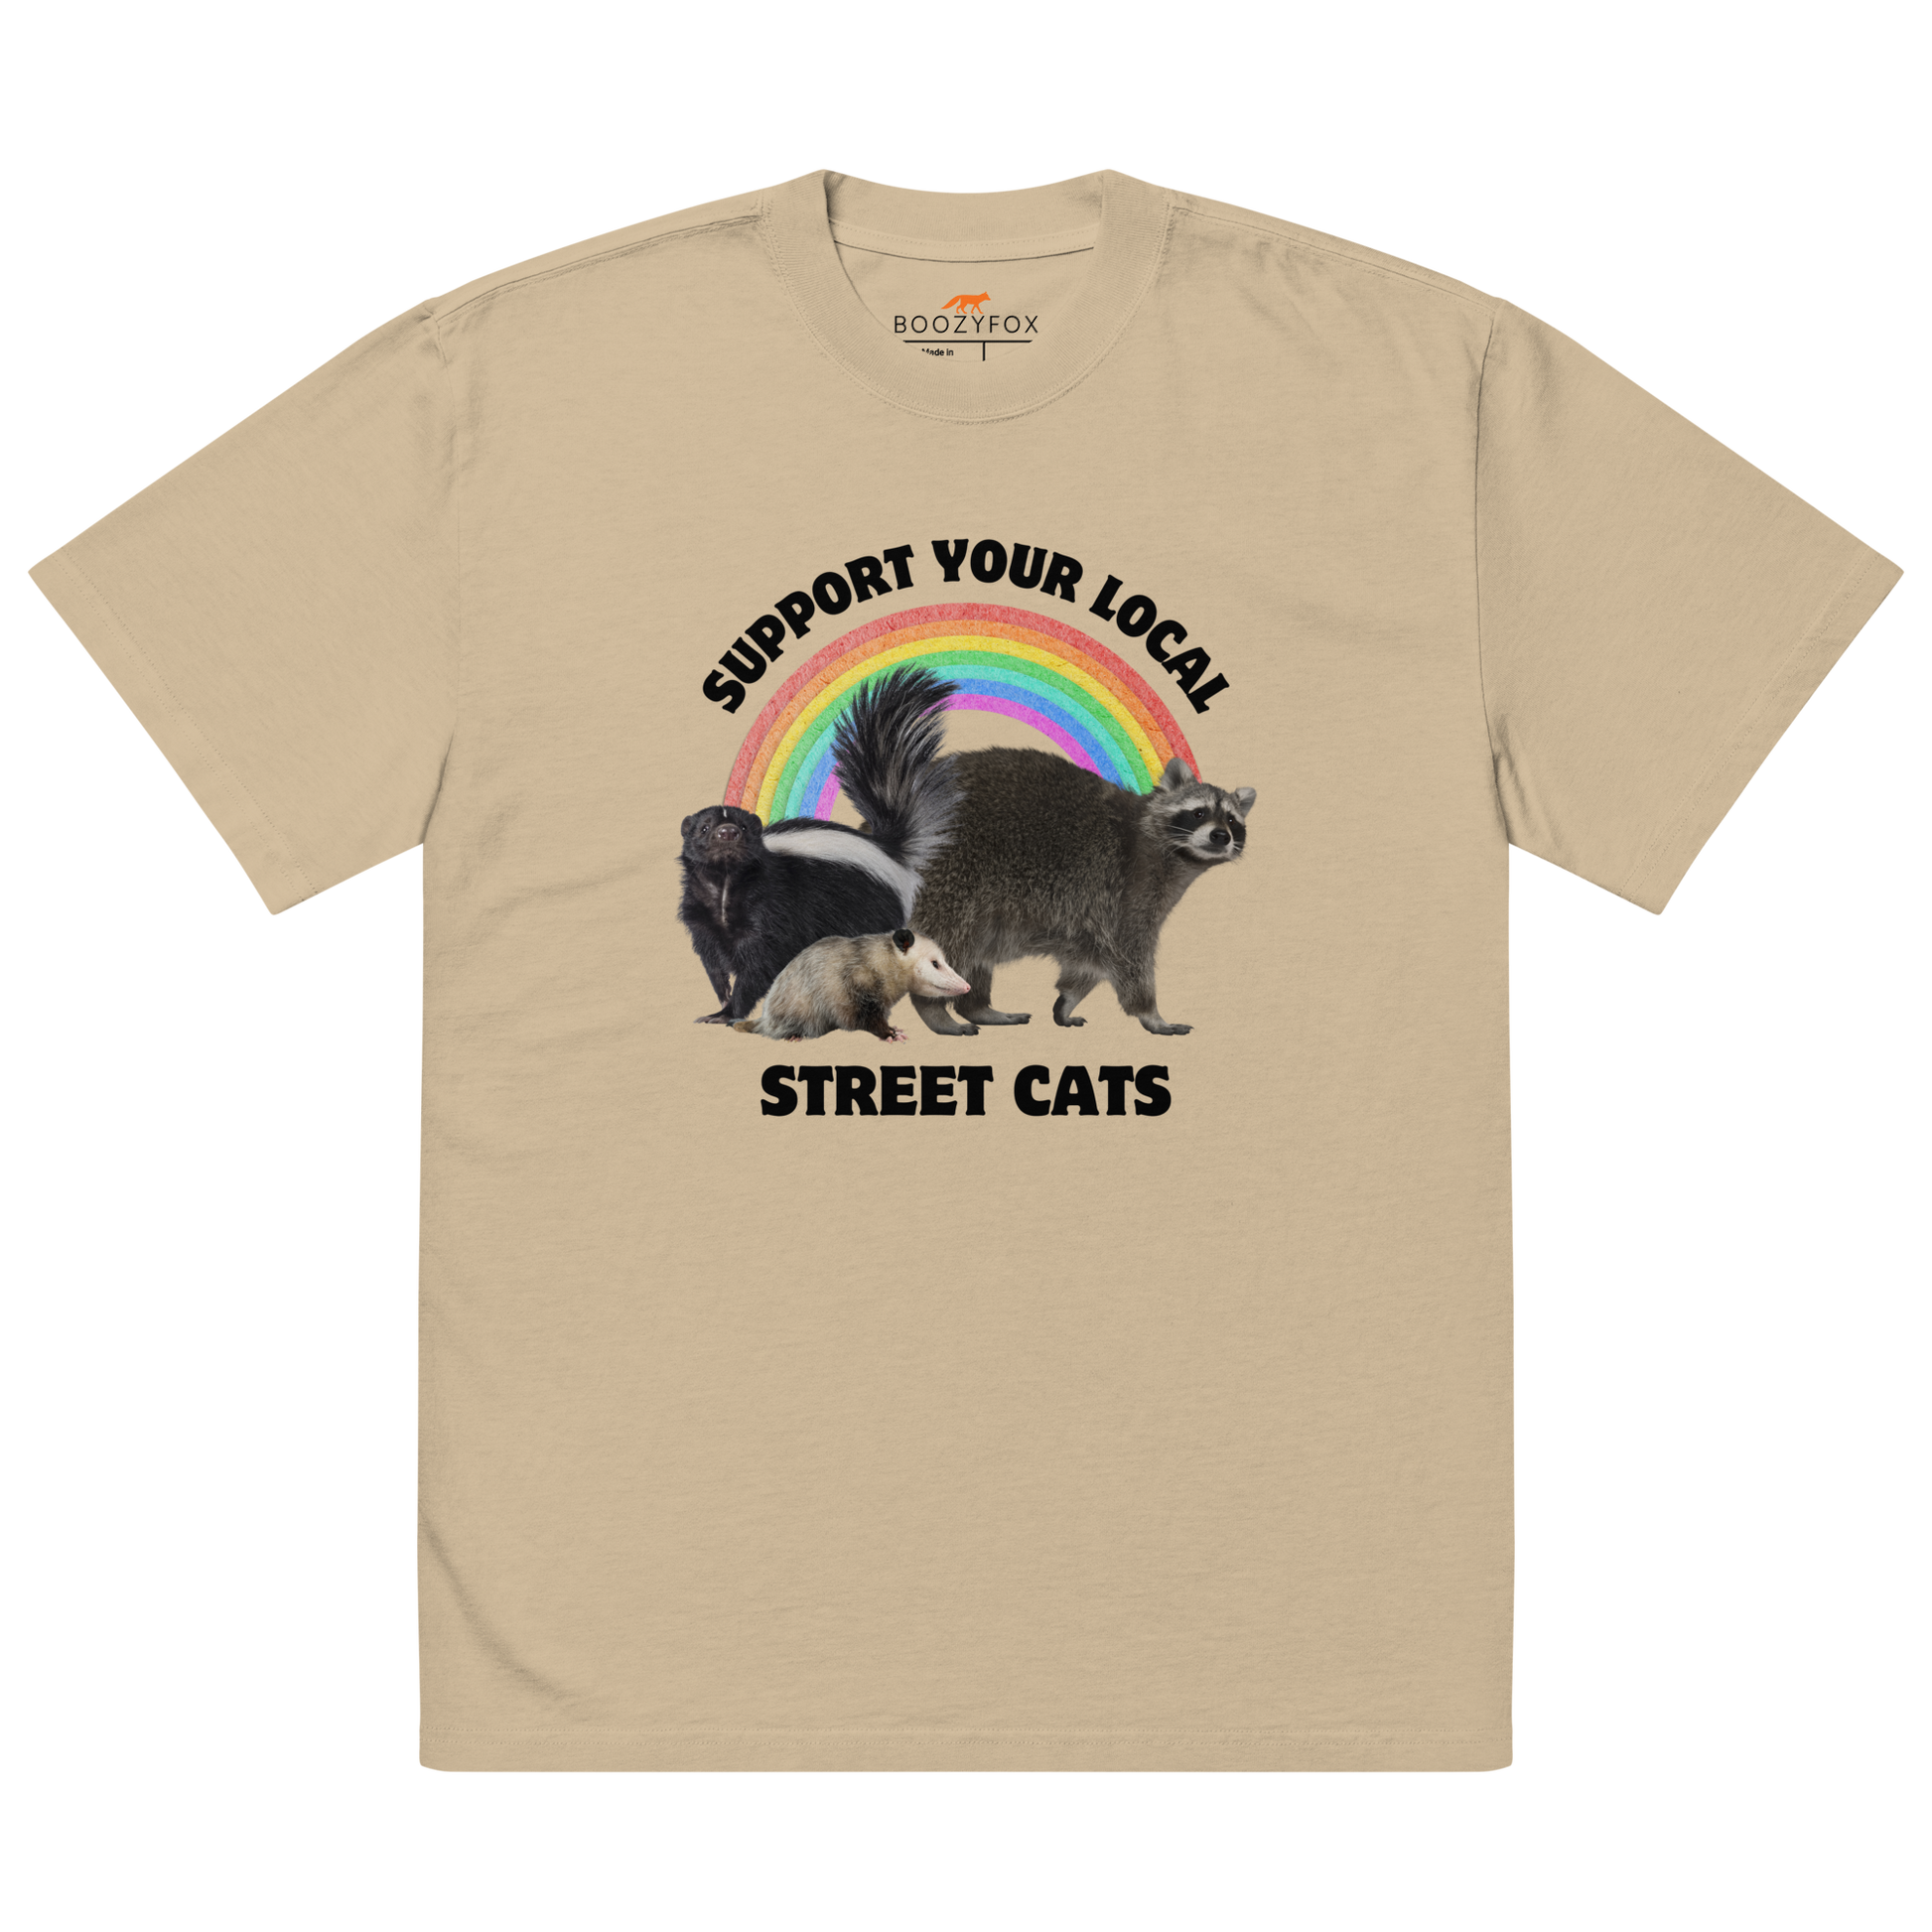 Faded Khaki Street Cats Oversized T-Shirt featuring a purr-fect trio – opossum, skunk, raccoon – and the Support Your Local Street Cats graphic on the chest - Funny Graphic Animal Oversized Tees - Boozy Fox